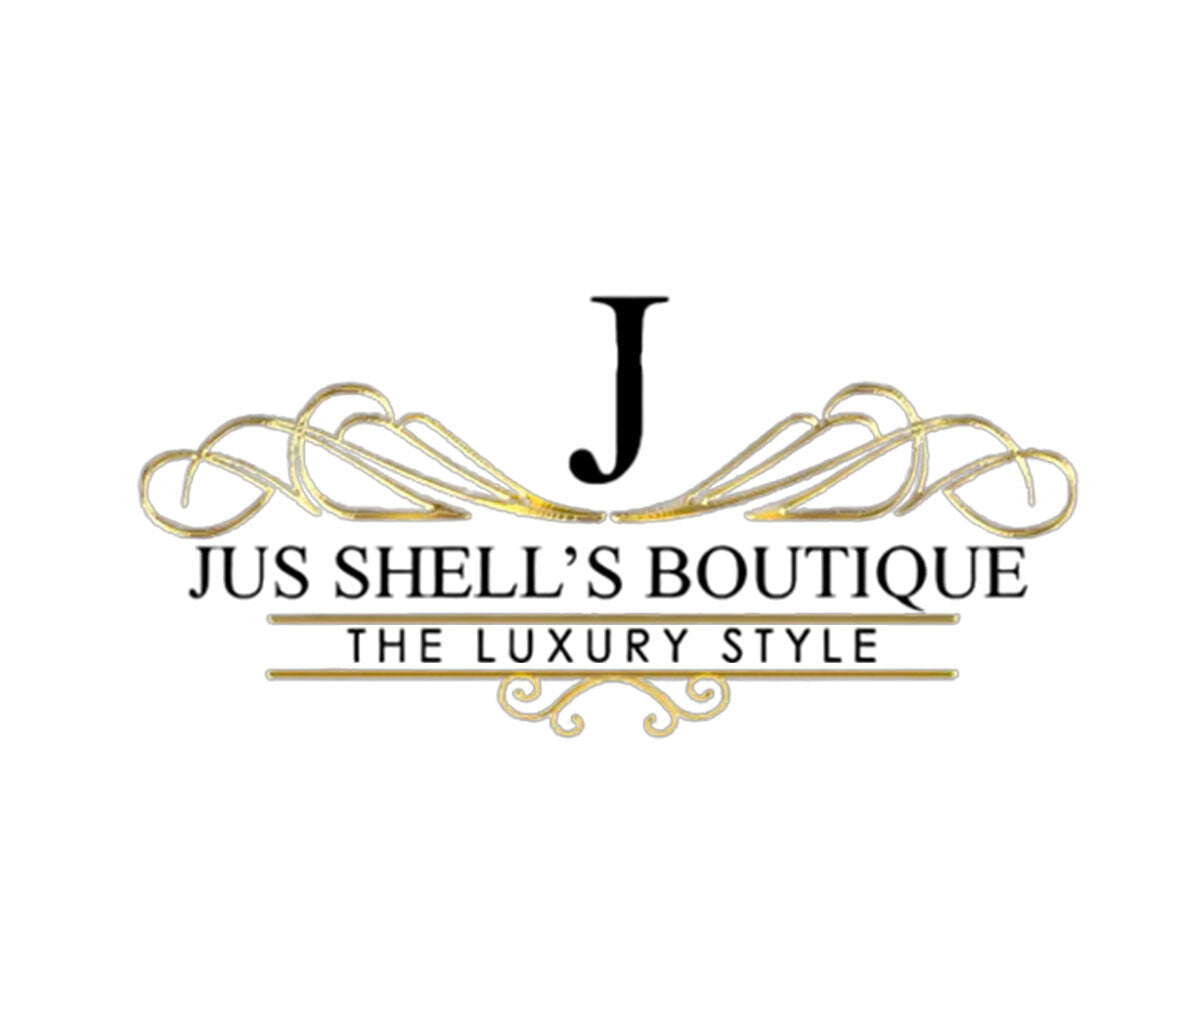 Jus Shell's Boutique